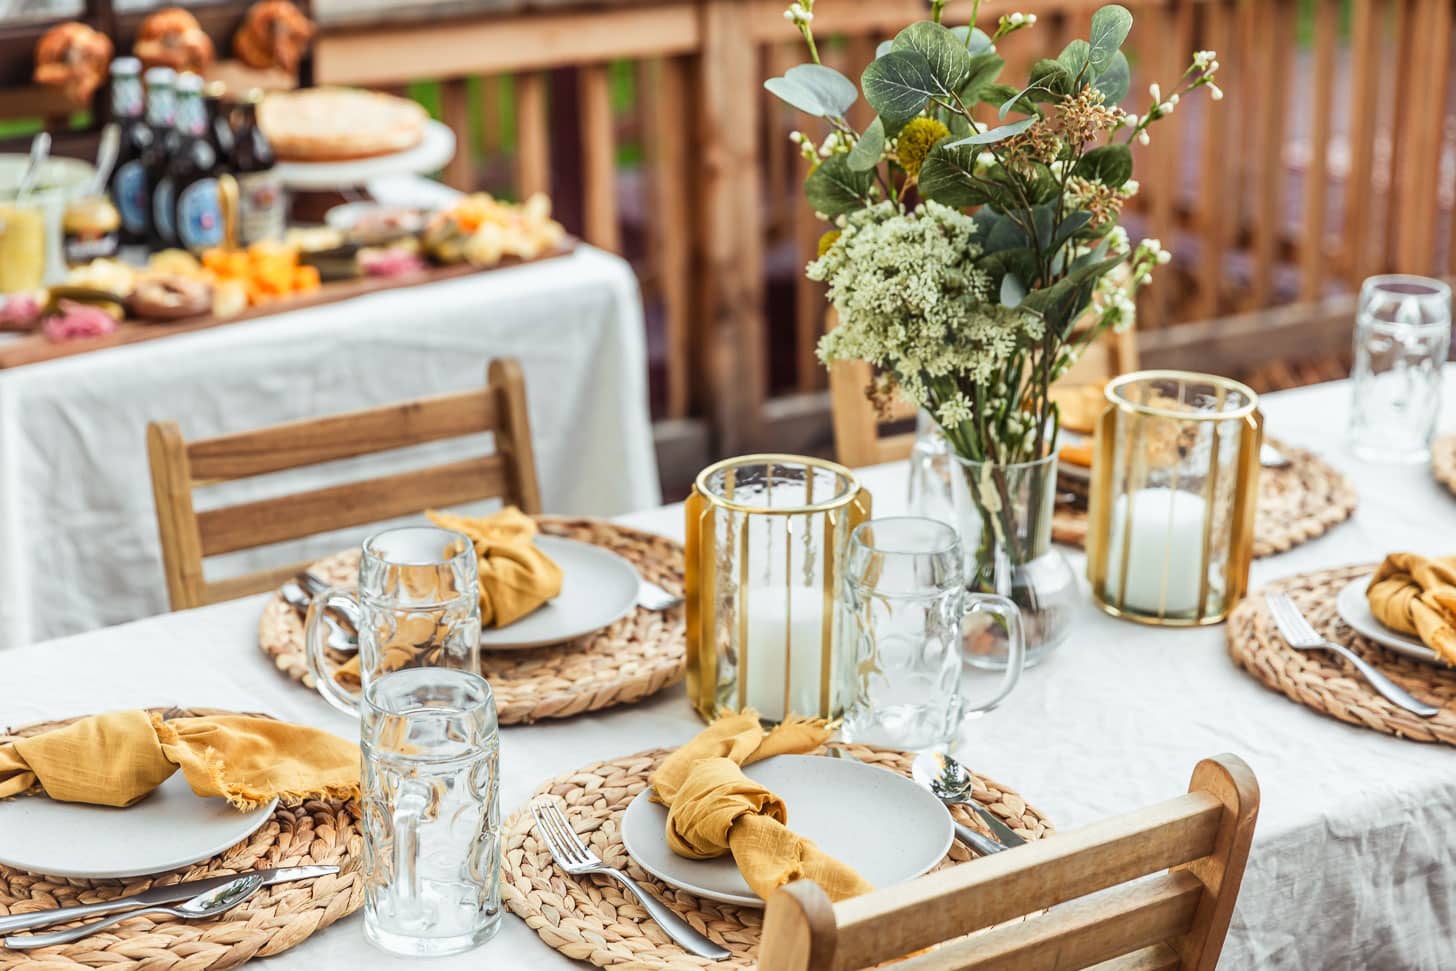 A backyard Oktoberfest party with a tablescape topped with a white tablecloth, wicker placemats, yellow napkins, beer steins, and green and white flowers with a German food table in the background.